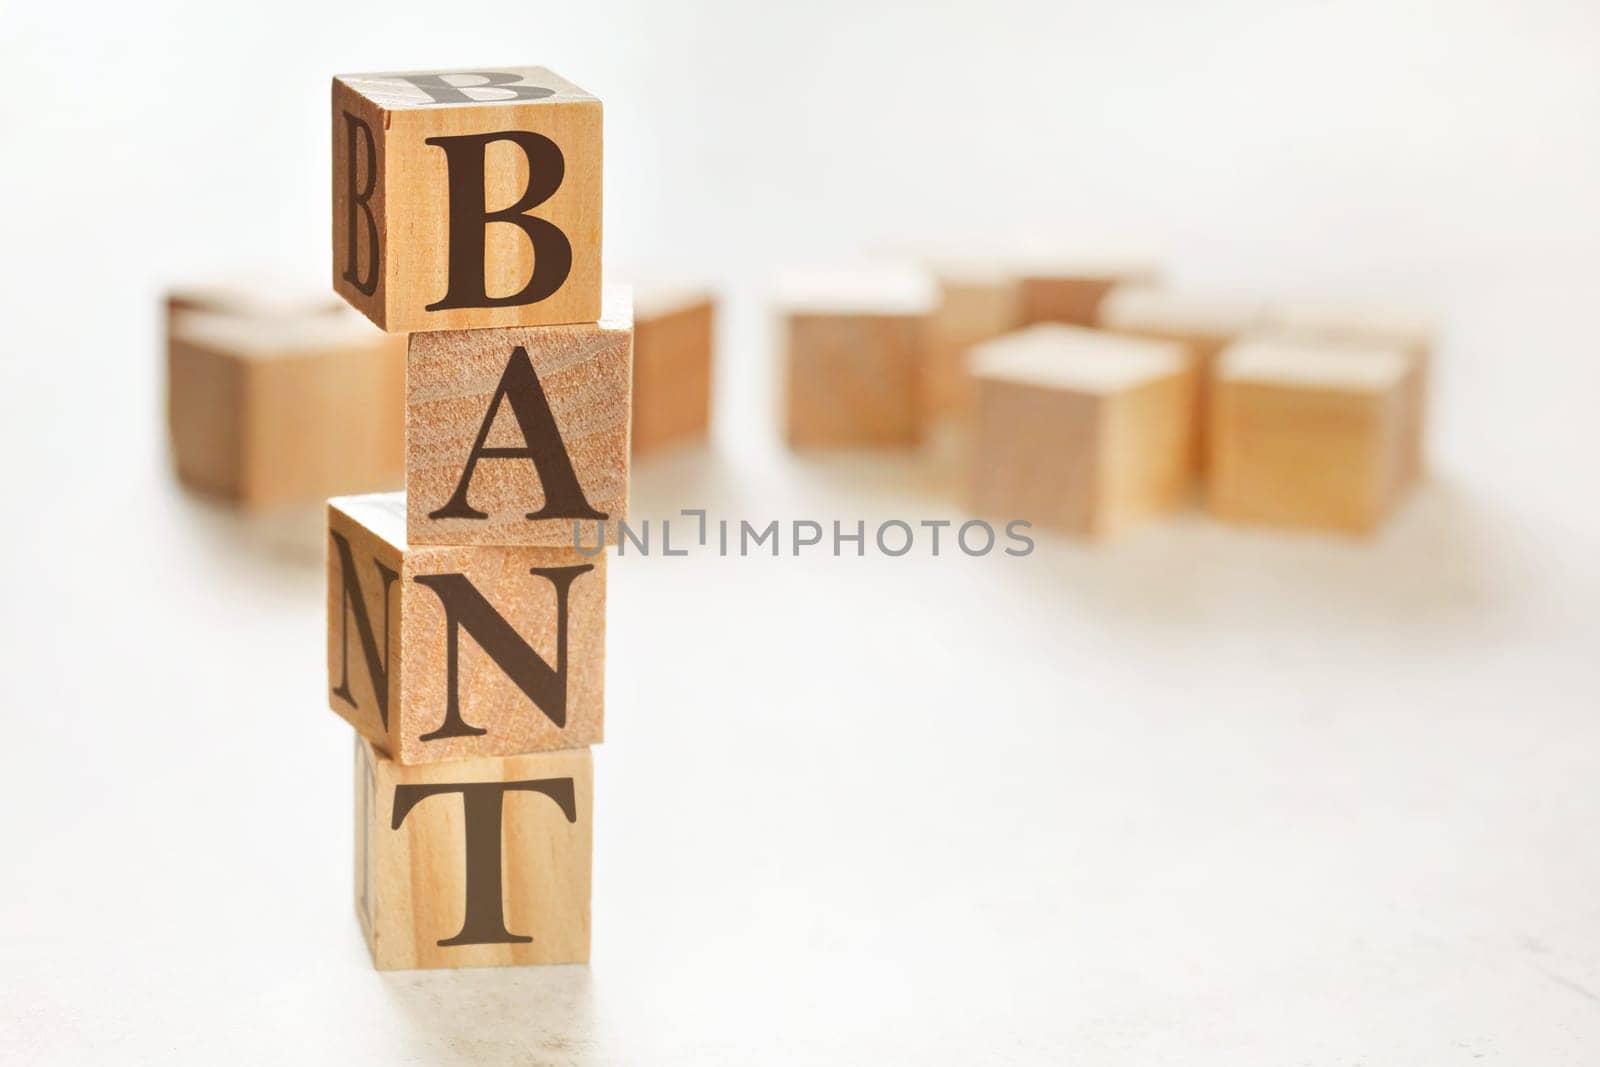 Four wooden cubes arranged in stack with letters BANT (acronym for Budget Authority Need Timeline) on them, space for text / image at down right corner by Ivanko